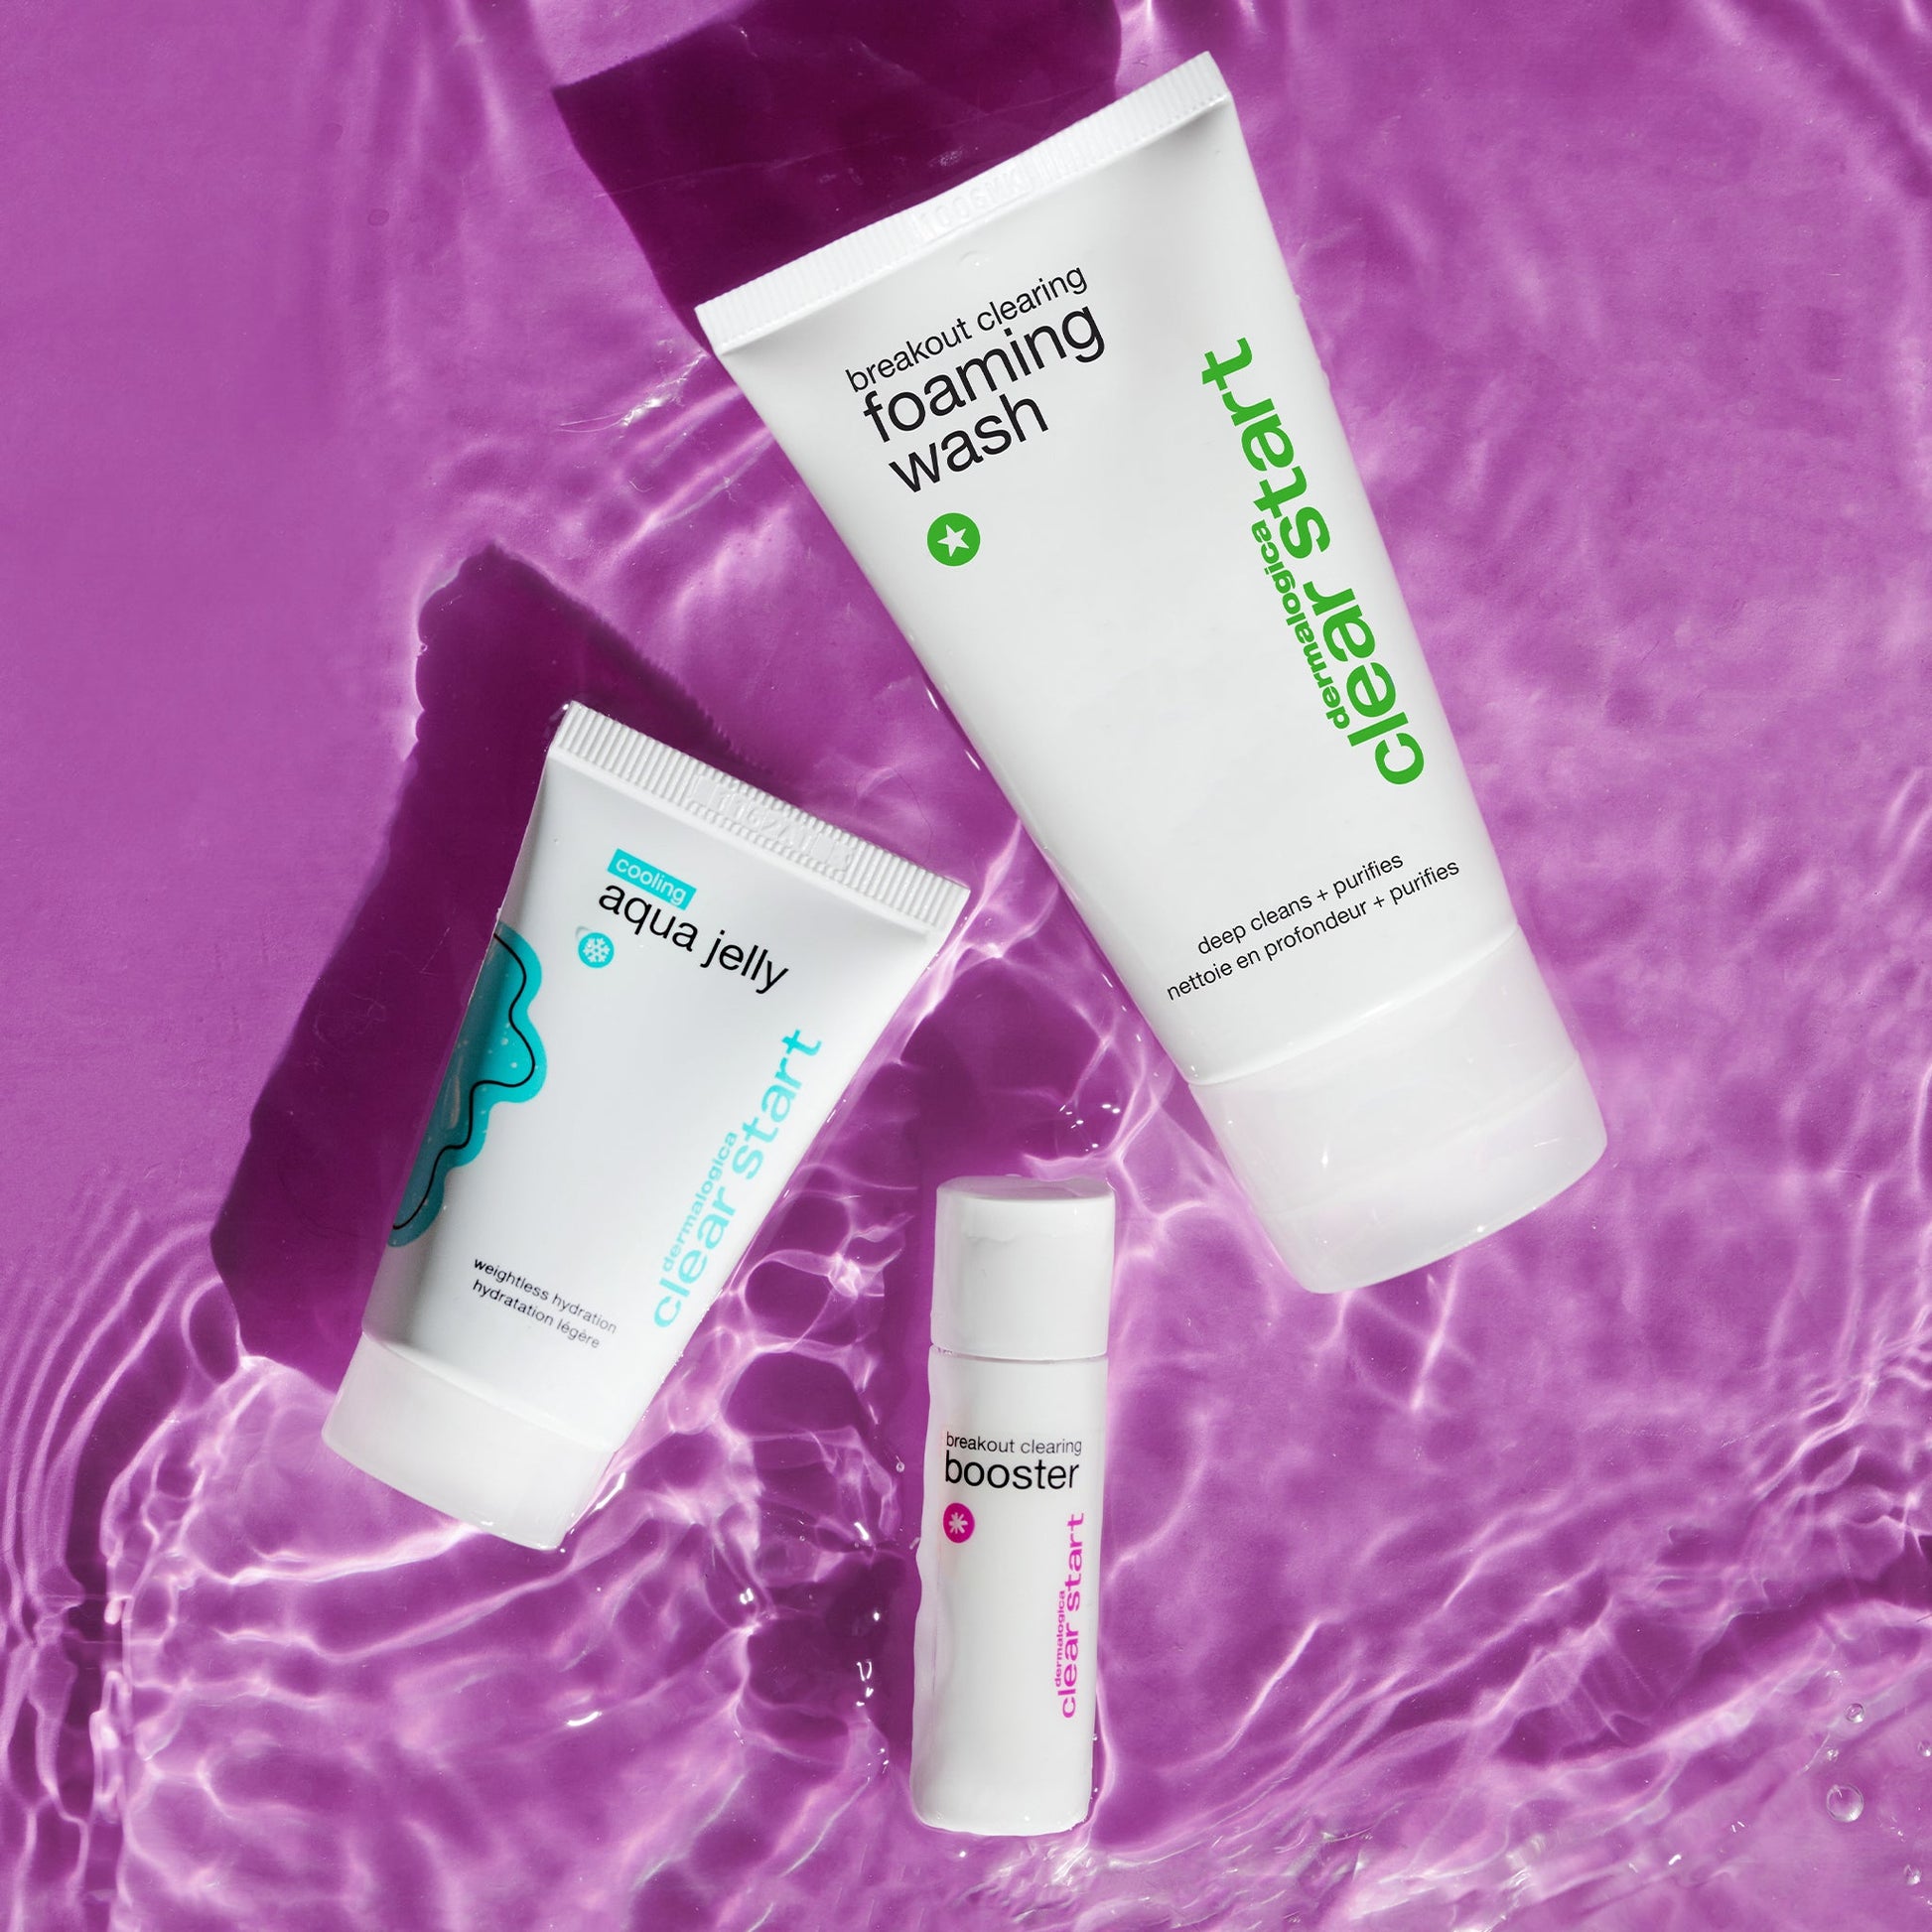 Breakout Clearing Foaming Wash, Cooling Aqua Jelly, Breakout Clearing Booster on water